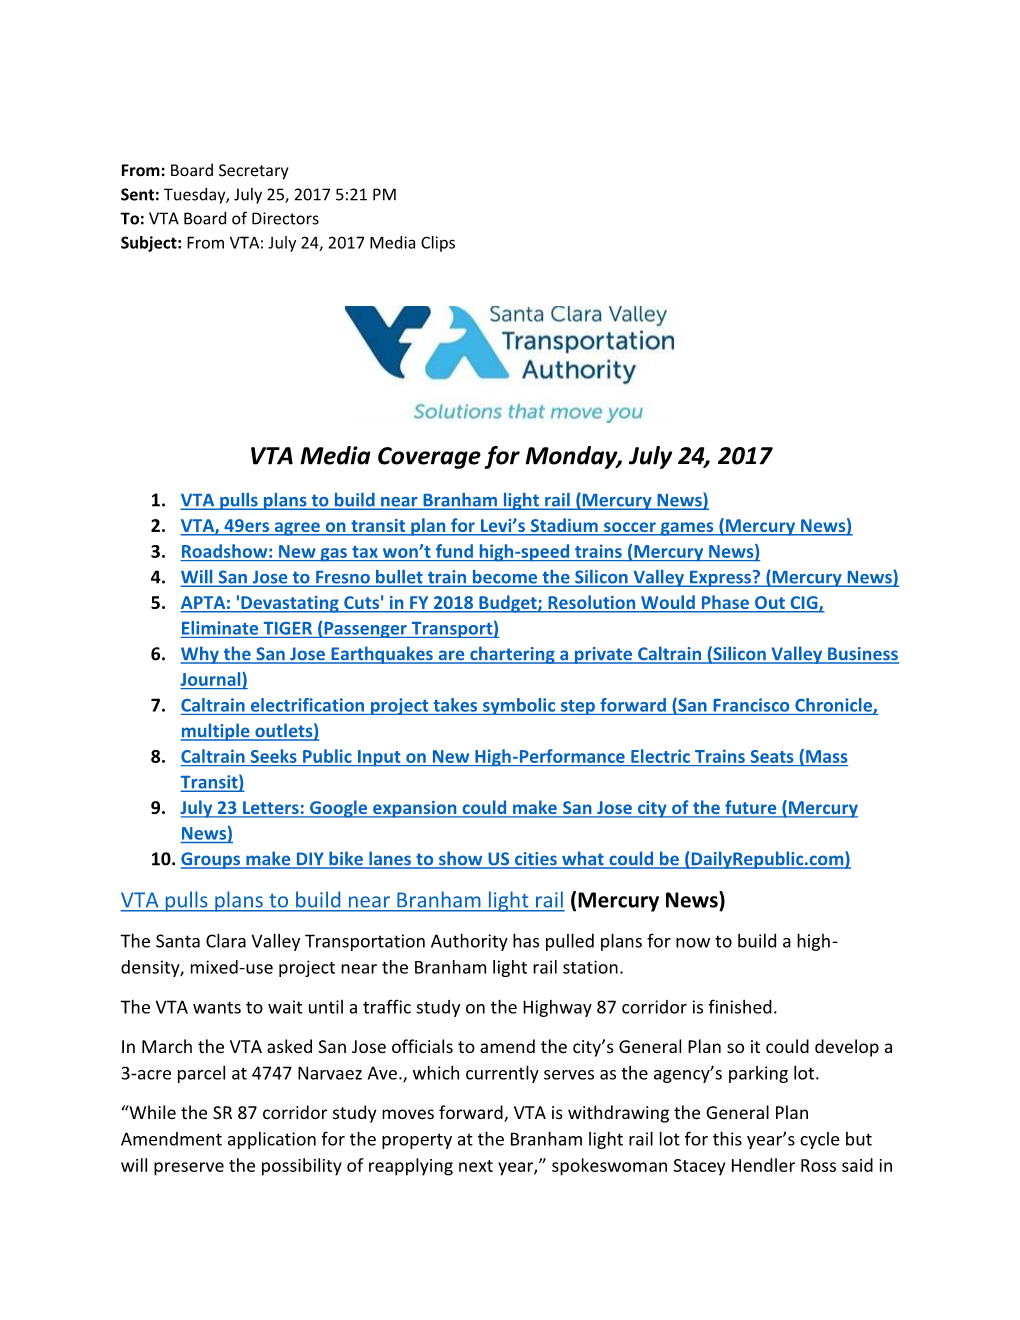 VTA Media Coverage for Monday, July 24, 2017